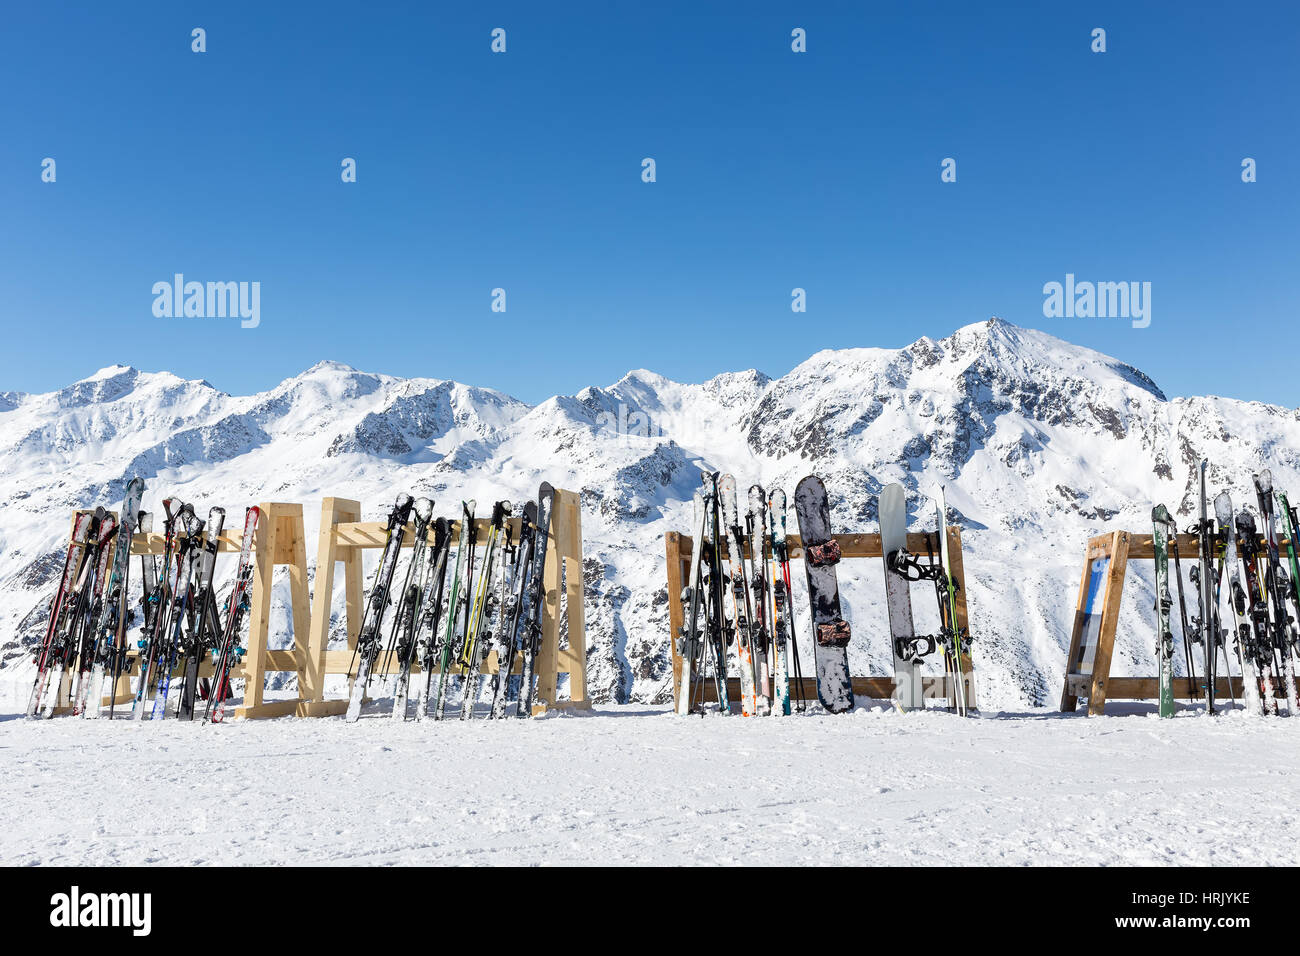 A line of skis and snowboards stored on racks outside a cafe on the slopes at Hochgurgl with the Otztal Alps in the background. All branding and logos Stock Photo